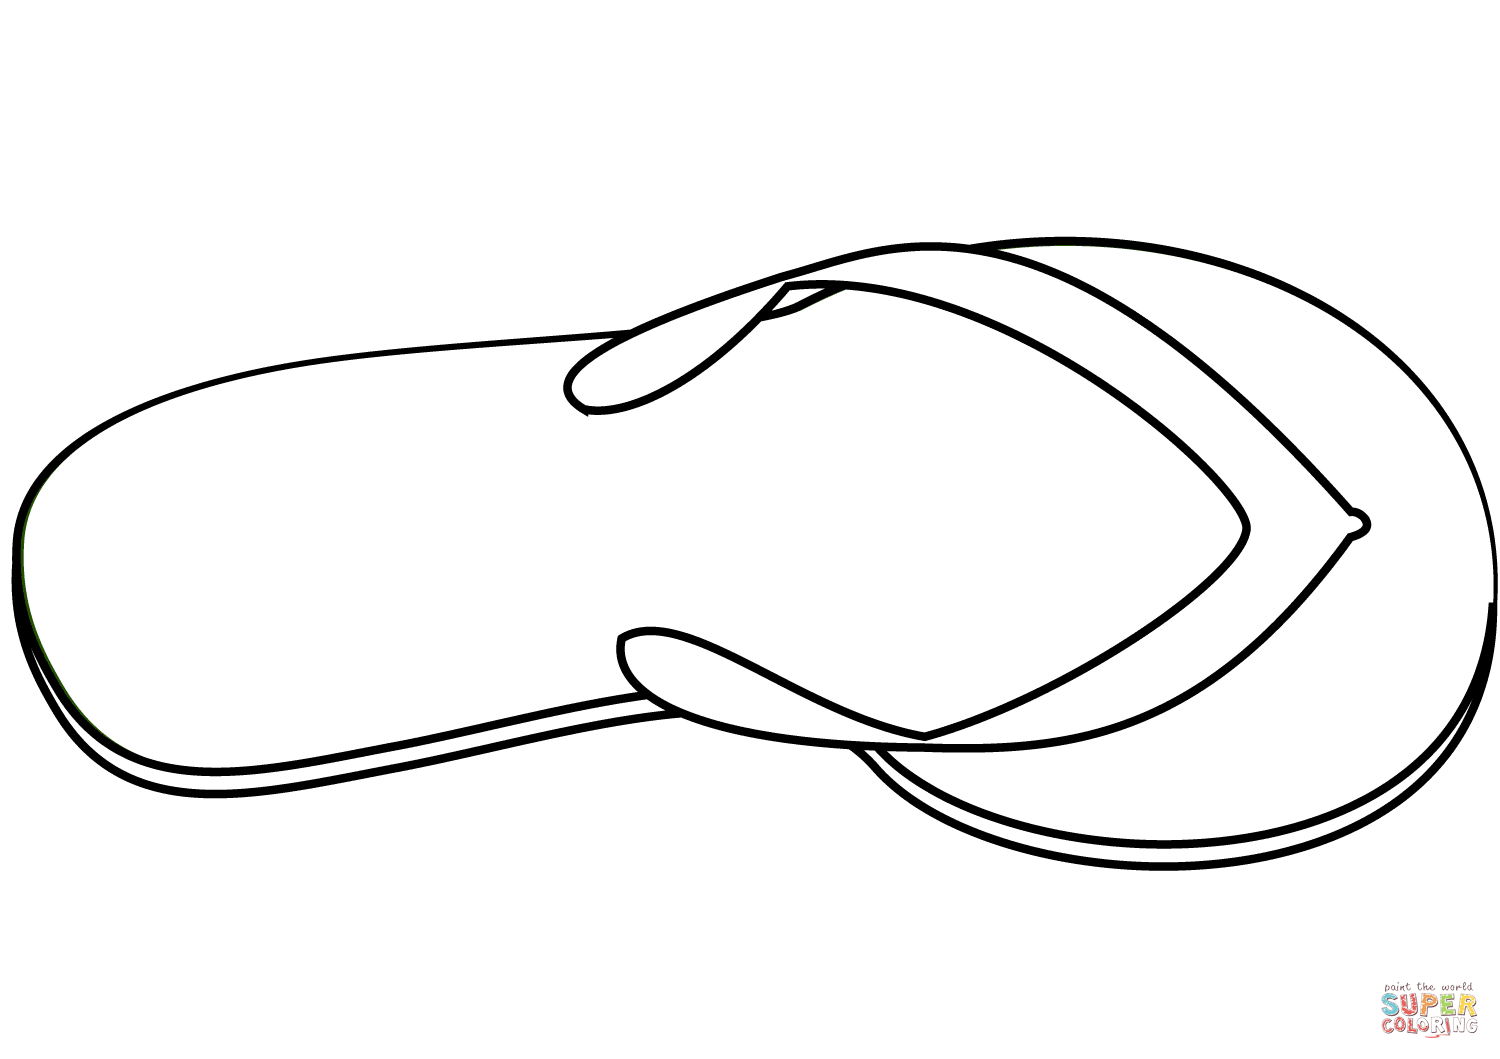 Flip flop coloring page free printable coloring pages